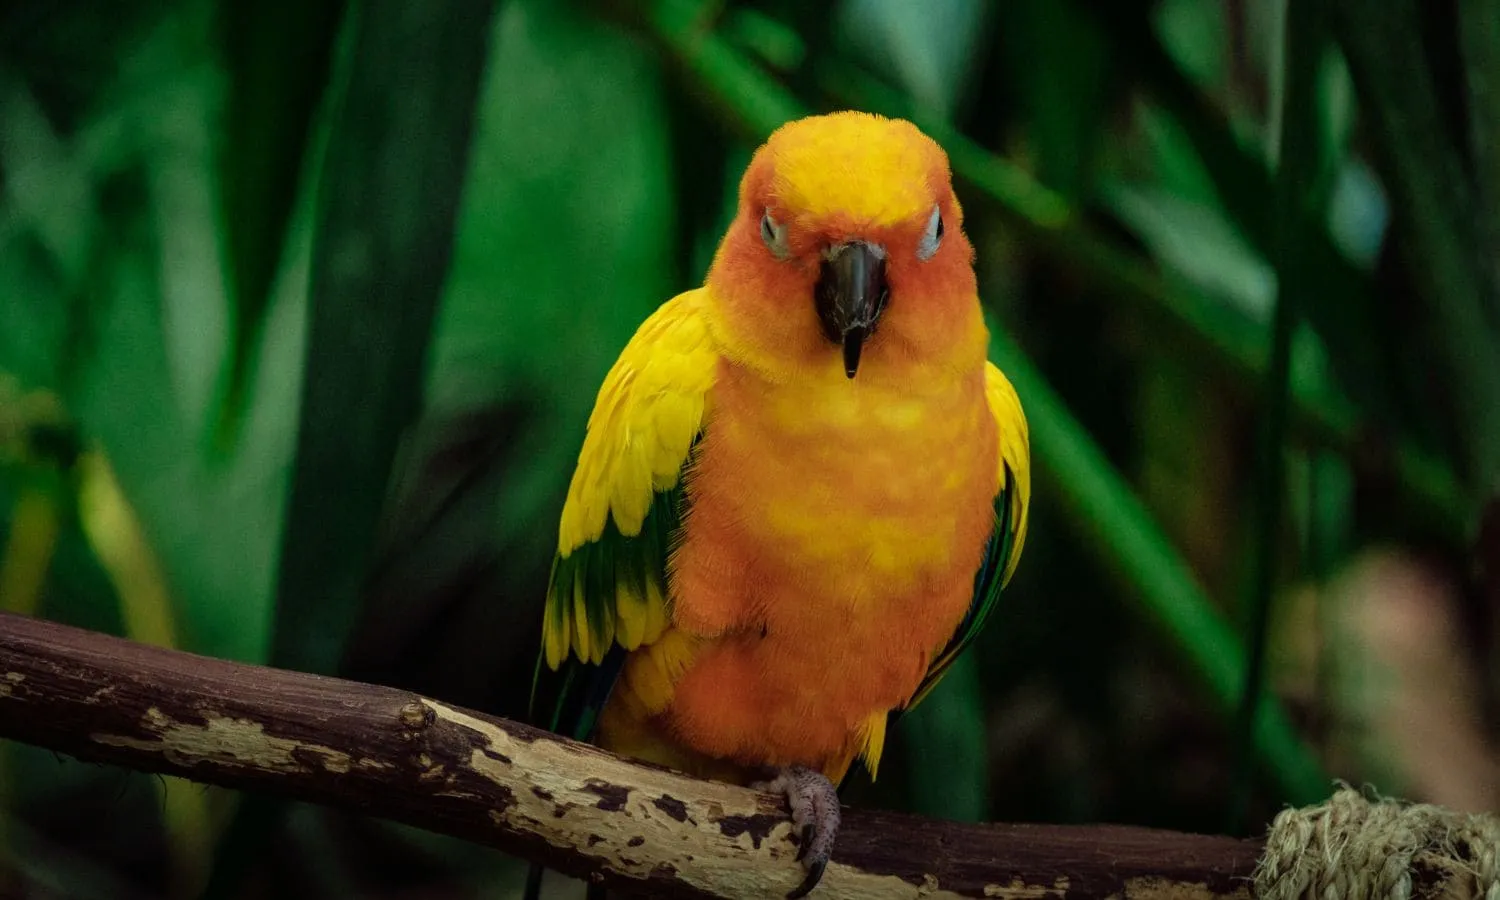 A tropical yellow bird, resident of The Green Planet